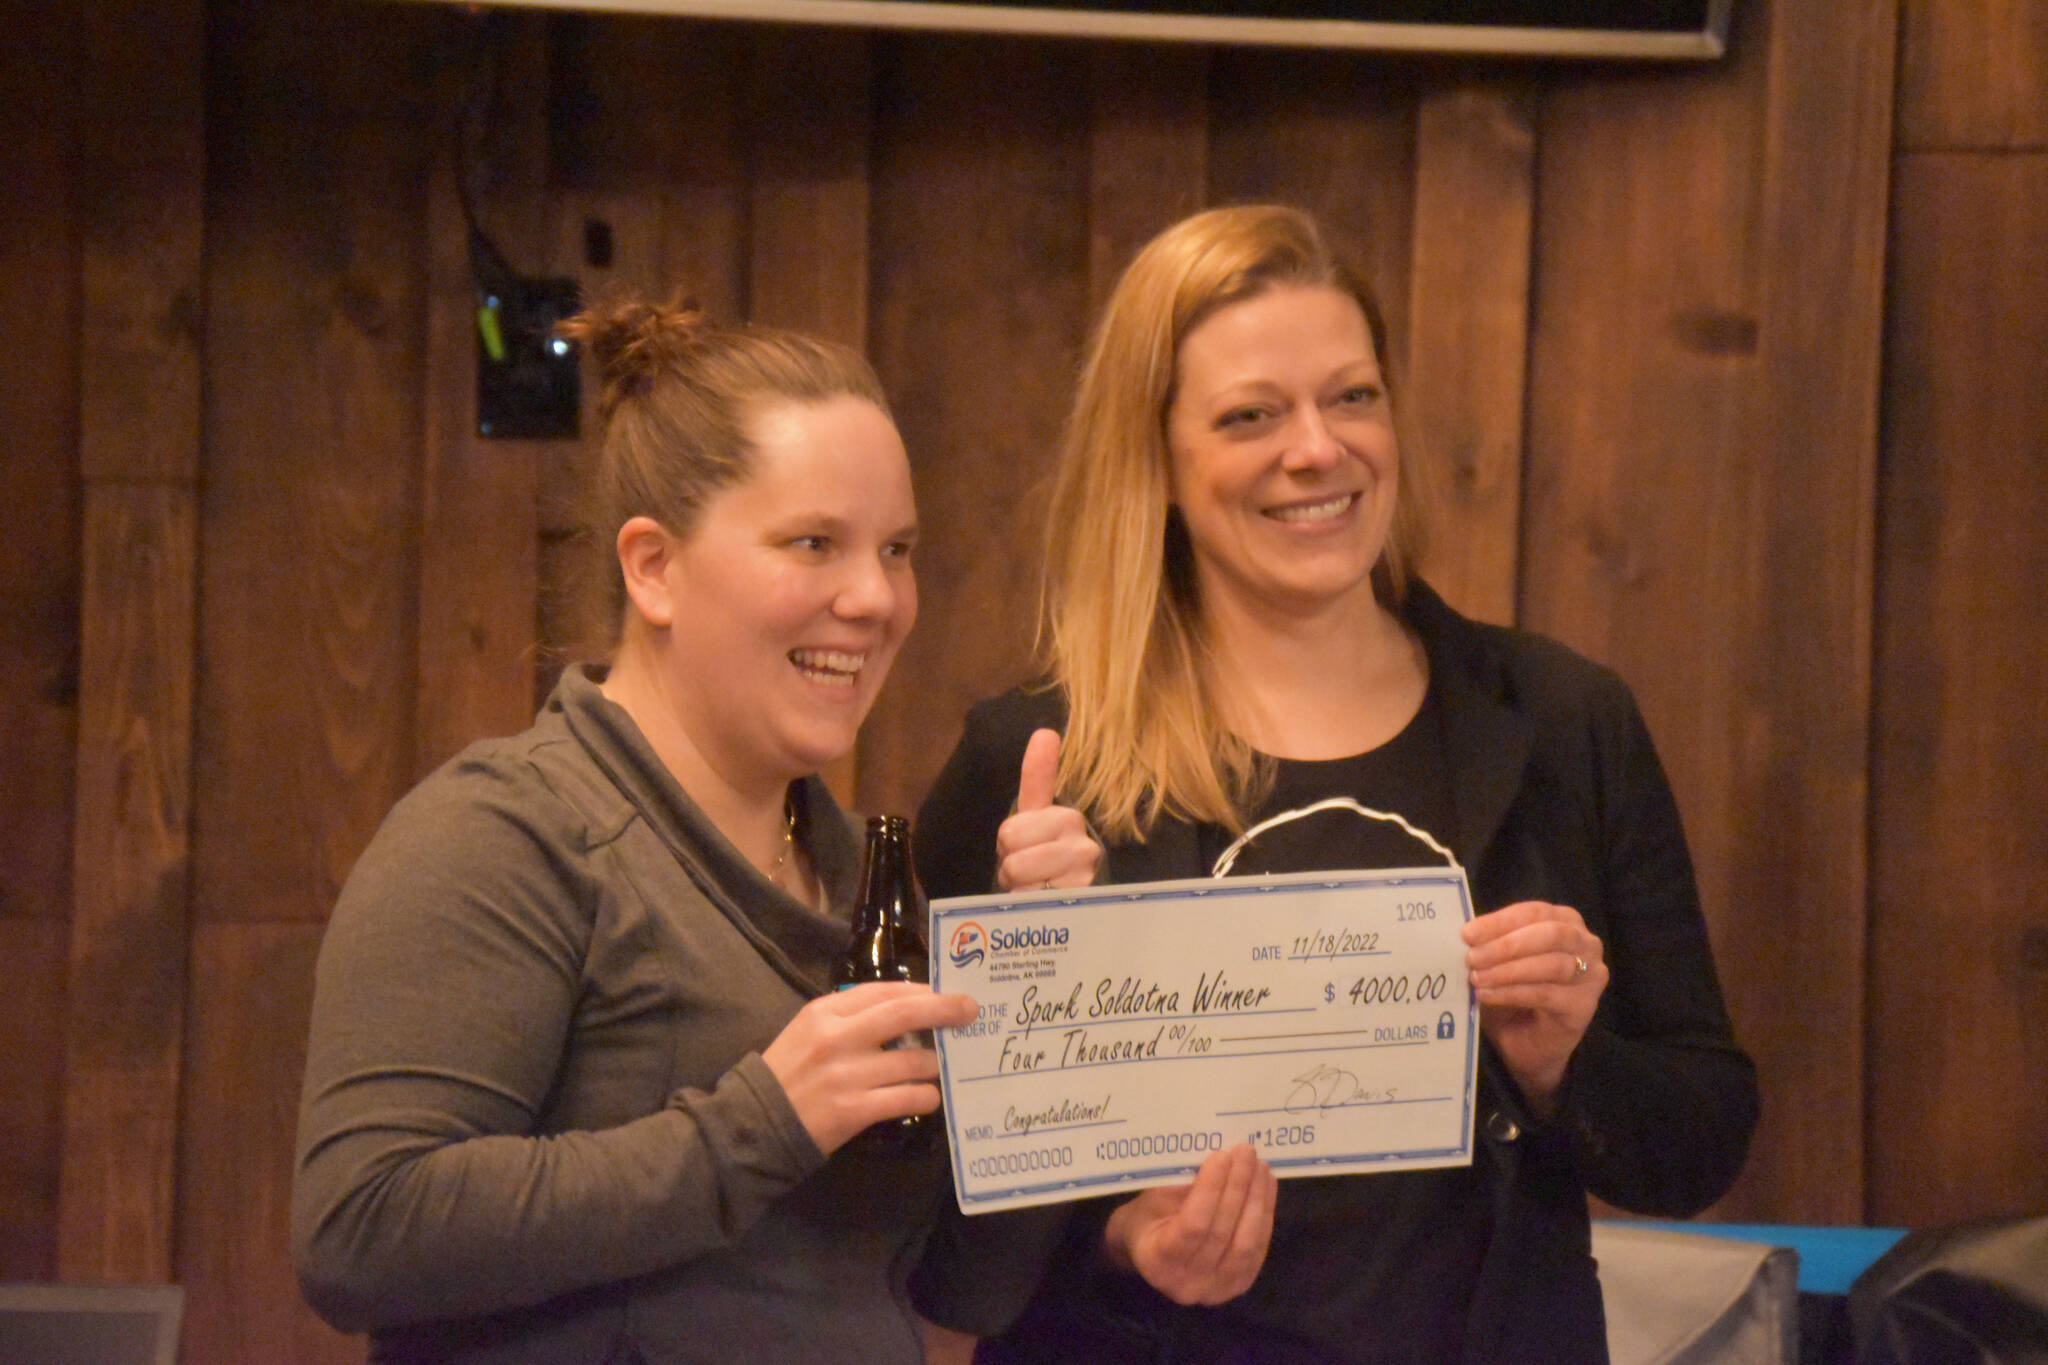 Top winners Samantha Pyfer and Anna Mercier are seen with a novelty check for $4000 at the Spark Soldotna Shark Tank Event on Friday, Nov. 18, 2022, at The Lone Moose Lodge in Soldotna, Alaska. (Jake Dye/Peninsula Clarion)